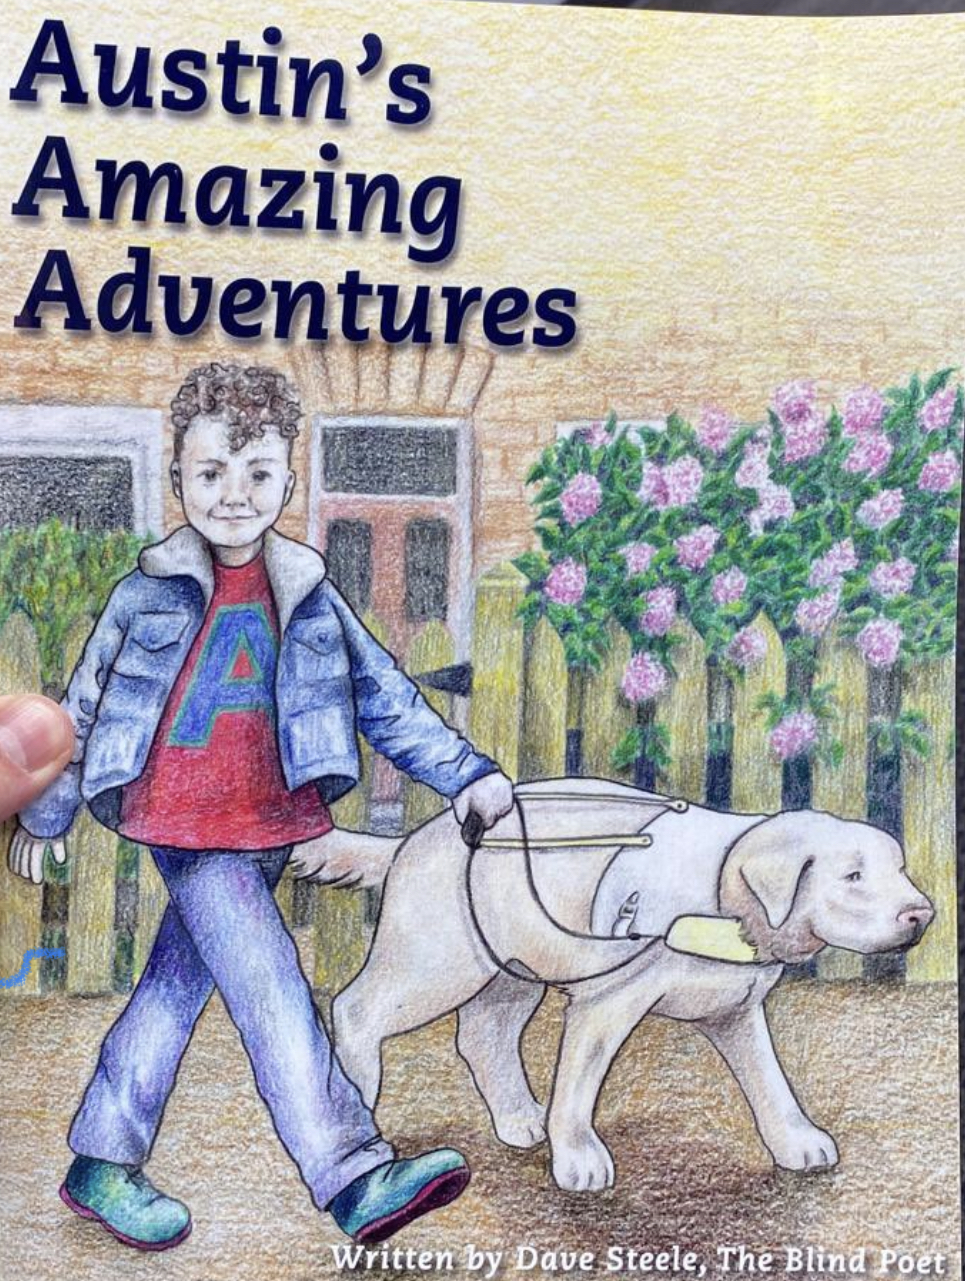 Austin’s Amazing Adventures - A Book by Dave Steele, The Blind Poet